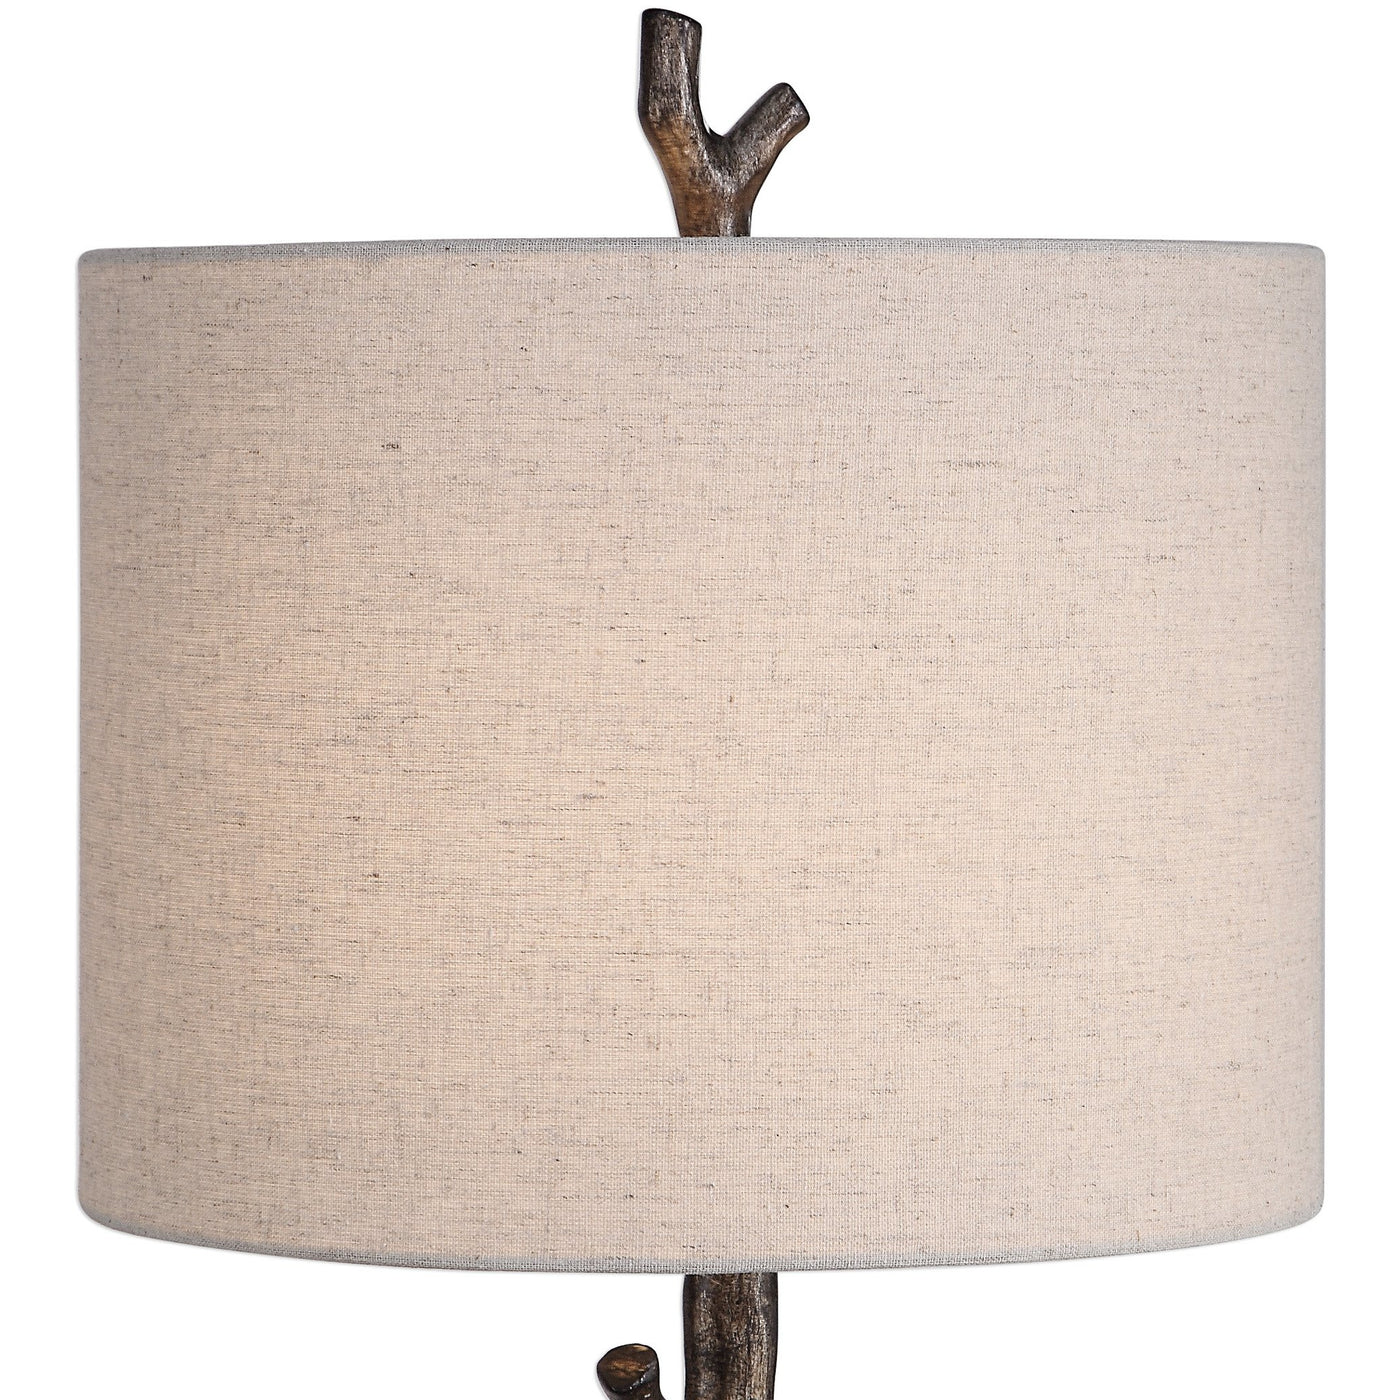 The Denali - Modern Wooden Style Table Lamp Other Lamps Glass.com 